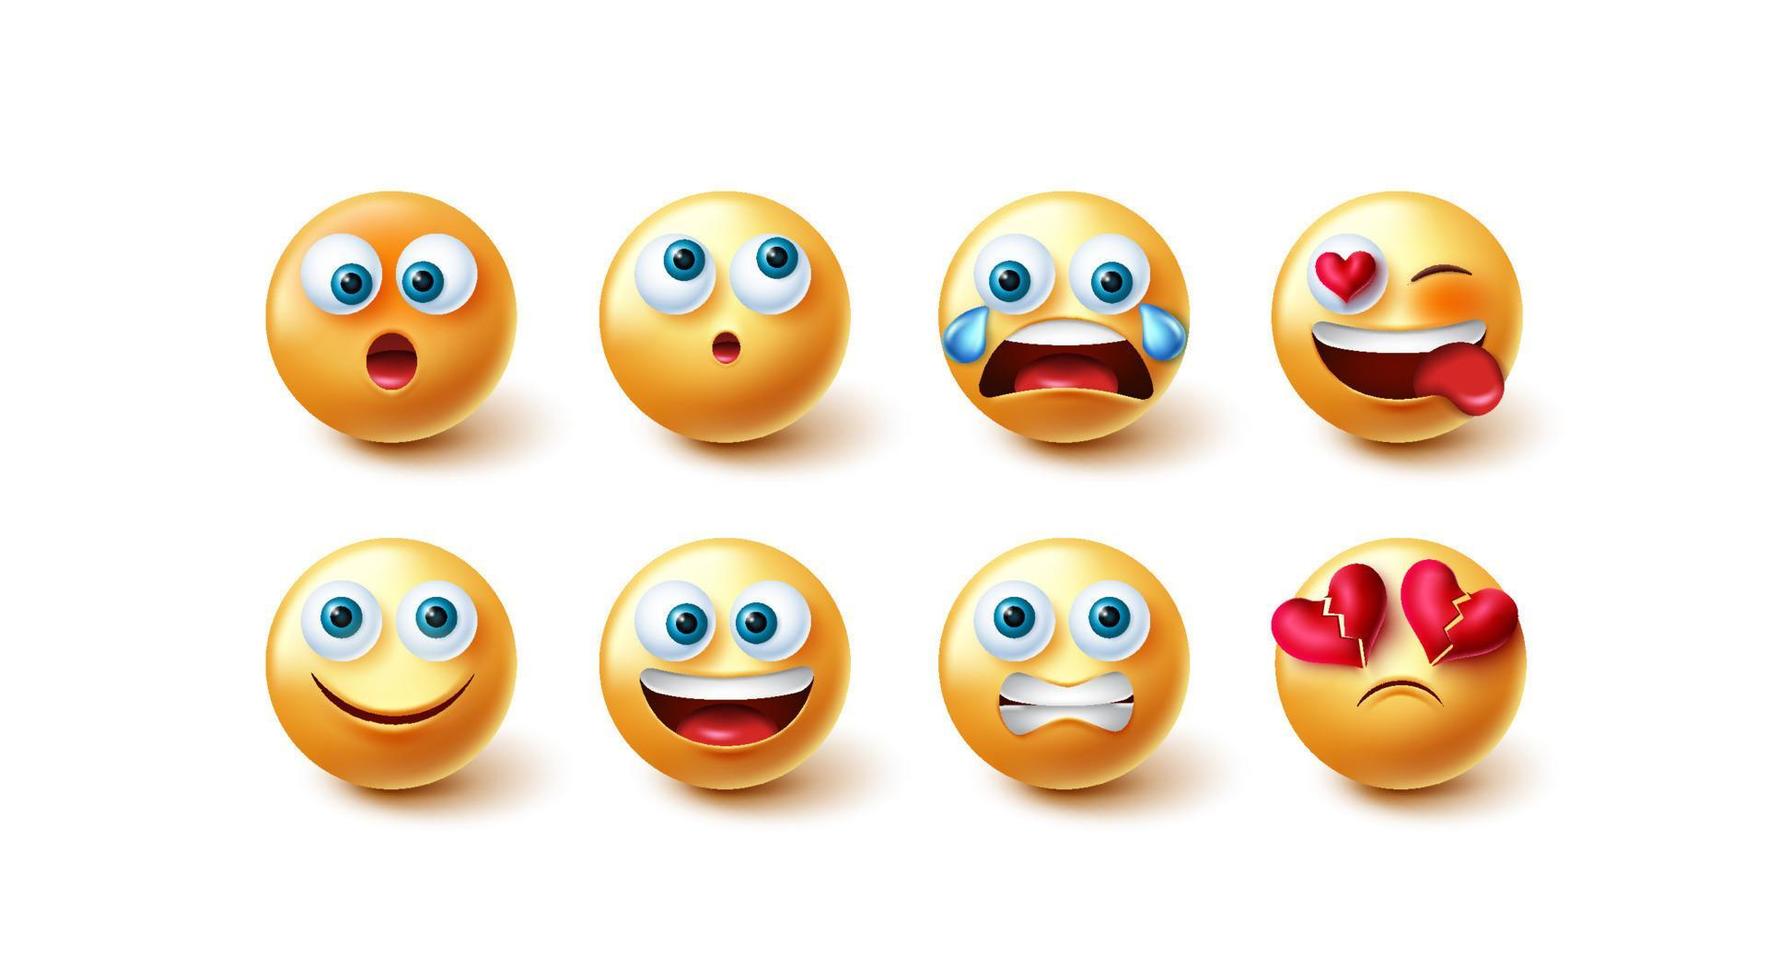 Emoji emoticons vector set. Emojis 3d character in happy and sad facial expressions isolated in white background for cute yellow faces graphic design collection. Vector illustration.